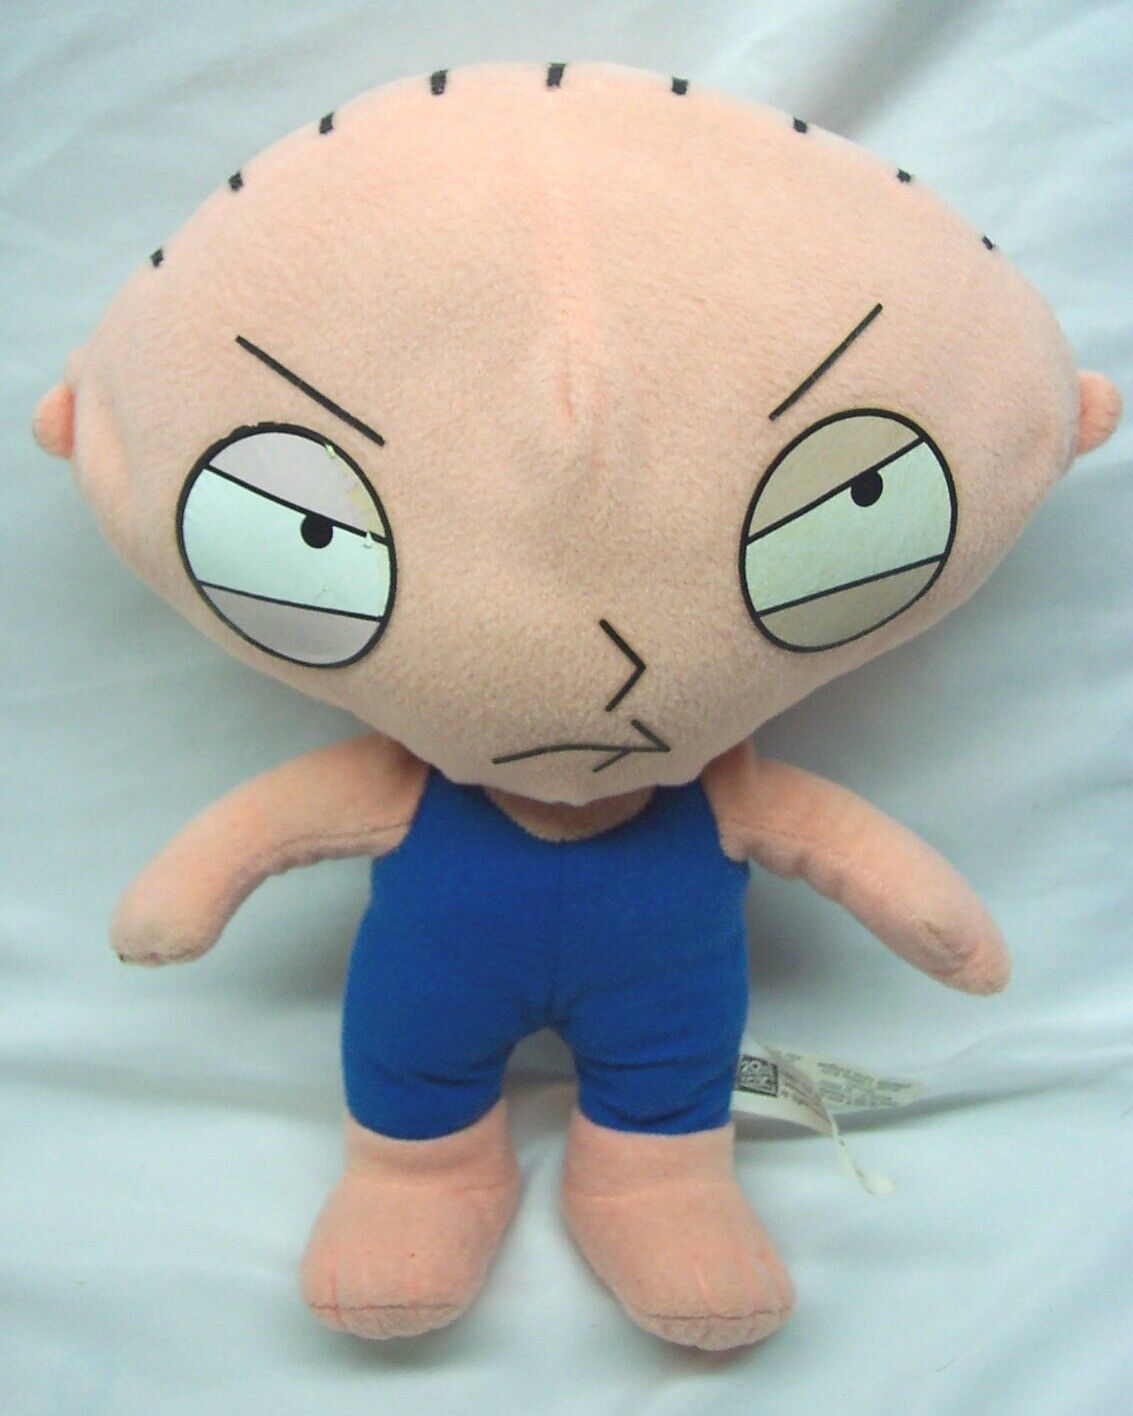 Primary image for Family Guy ANGRY STEWIE BABY BOY 12" Plush Stuffed Animal Toy 2007 NANCO